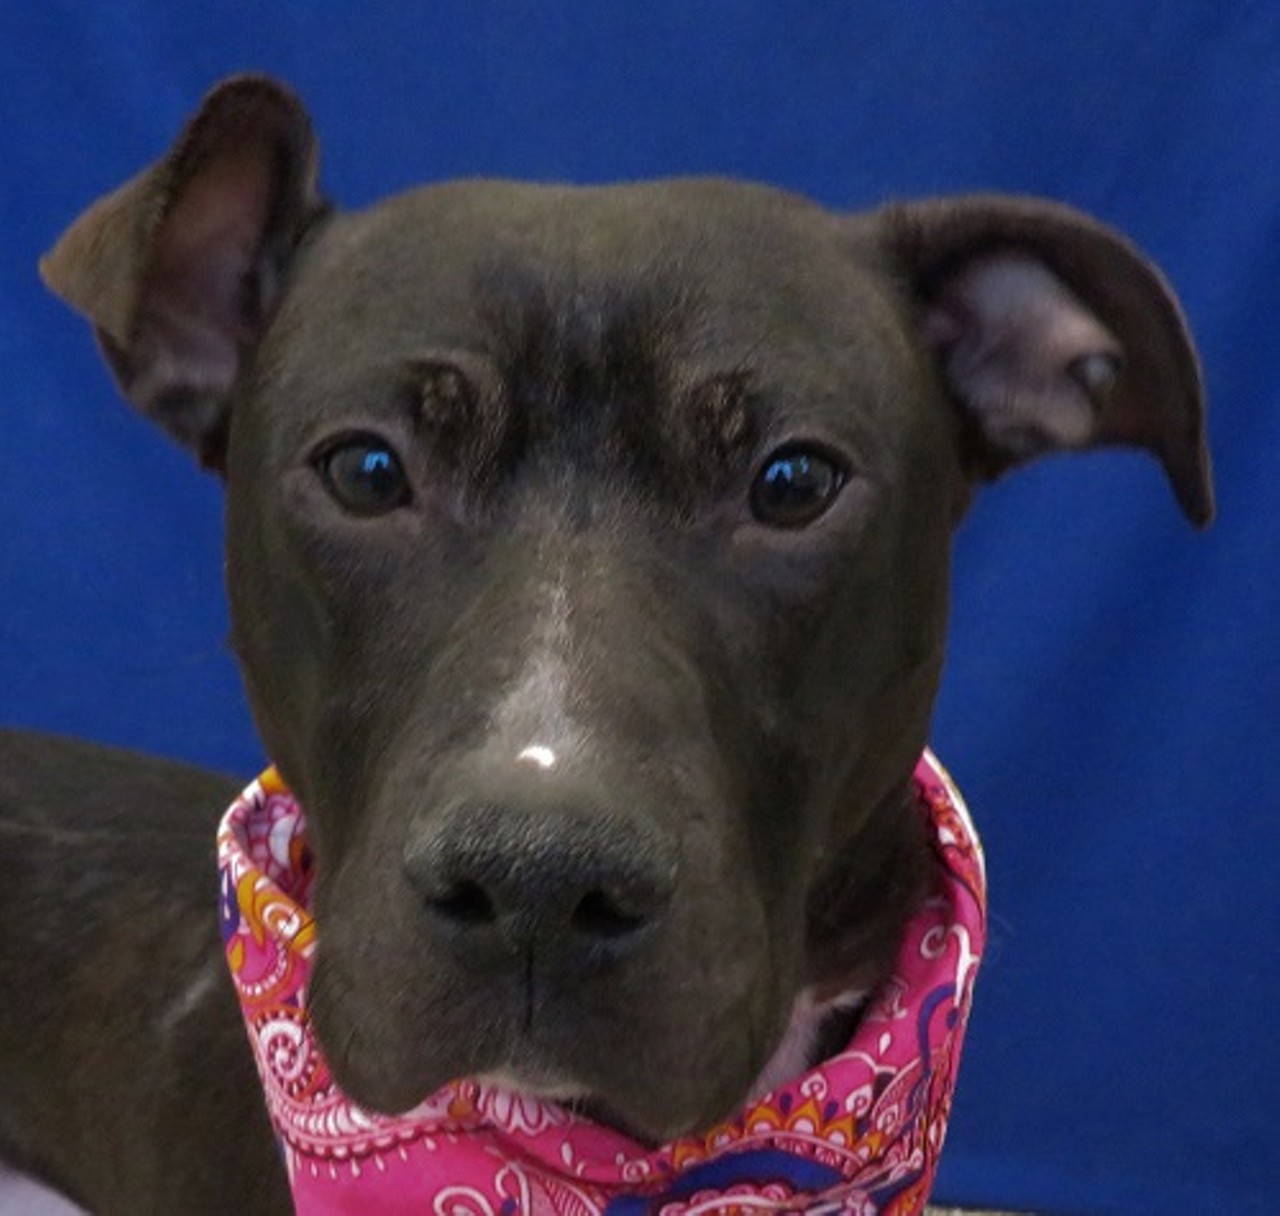 NAME: Norah
GENDER: Female
BREED: Pit Bull Terrier
AGE: 2 years, 2 months
WEIGHT: 42 pounds
SPECIAL CONSIDERATIONS: Prefers older children
REASON I CAME TO MHS: Homeless in Detroit
LOCATION: Rochester Hills Center for Animal Care
ID NUMBER: 861842